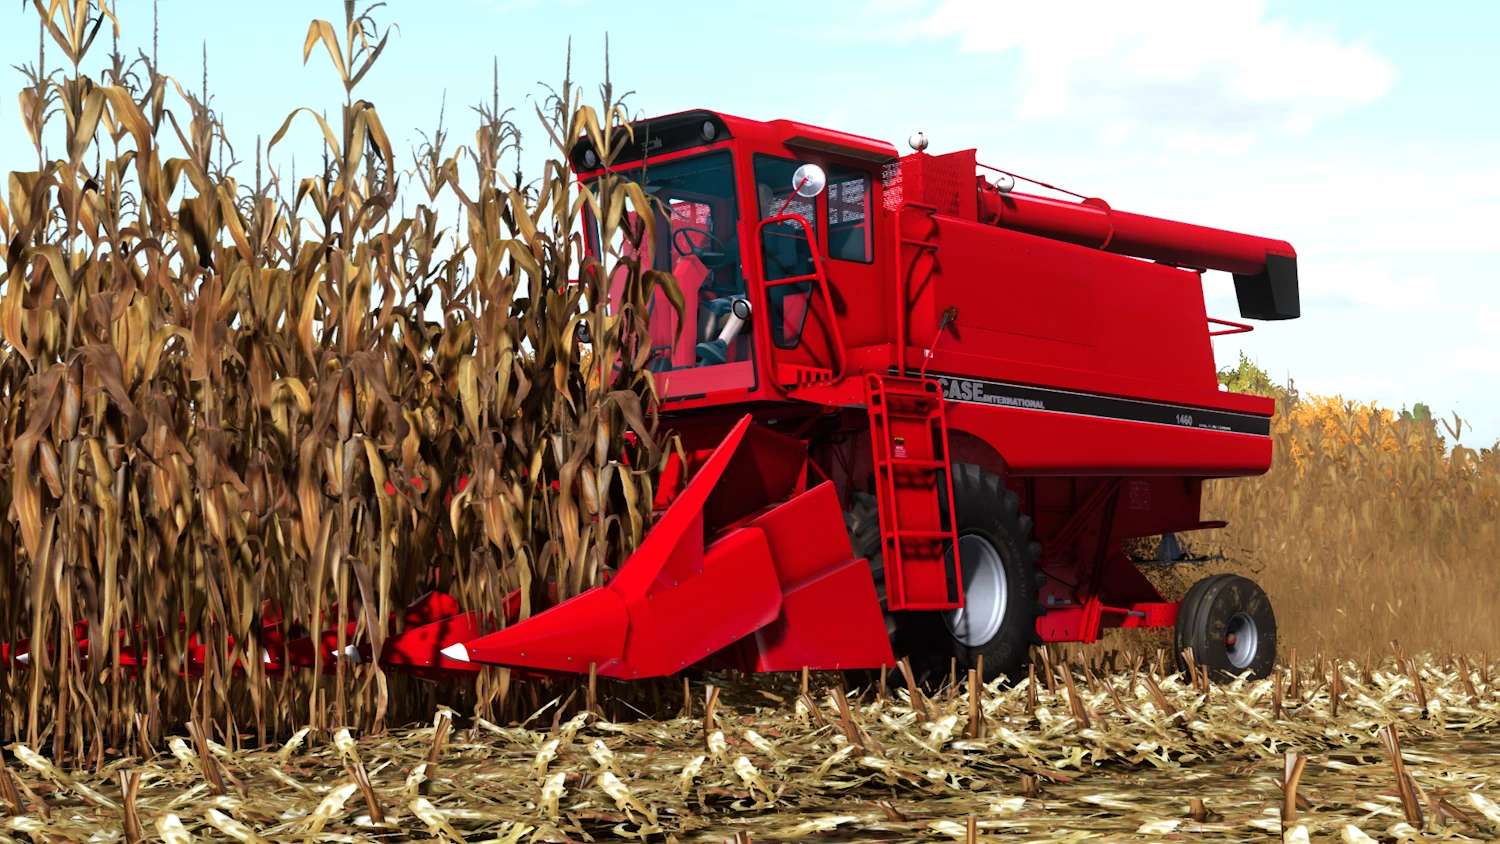 Case IH Axial Flow Combines - Wikipedia